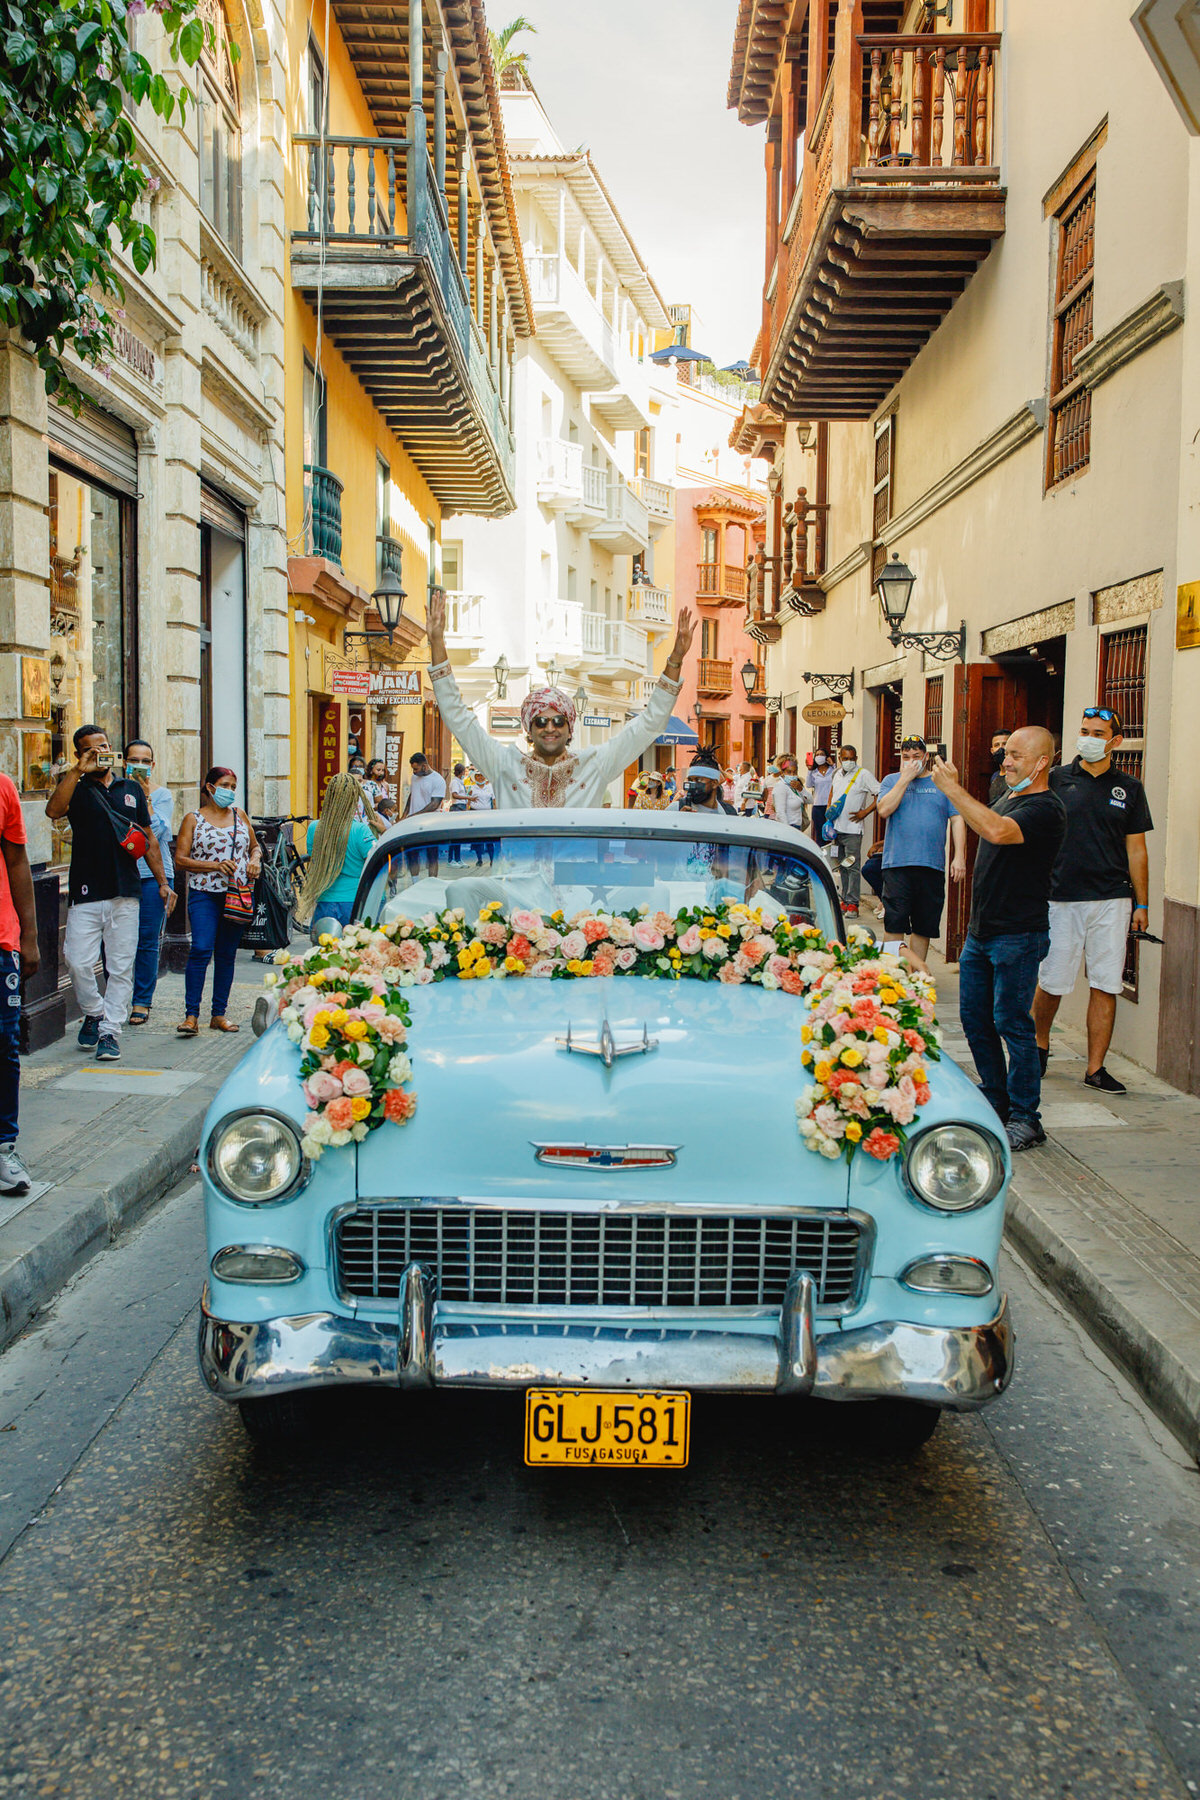 Festive baraat procession featuring the groom's grand arrival, accompanied by lively music and dancing in Cartagena.